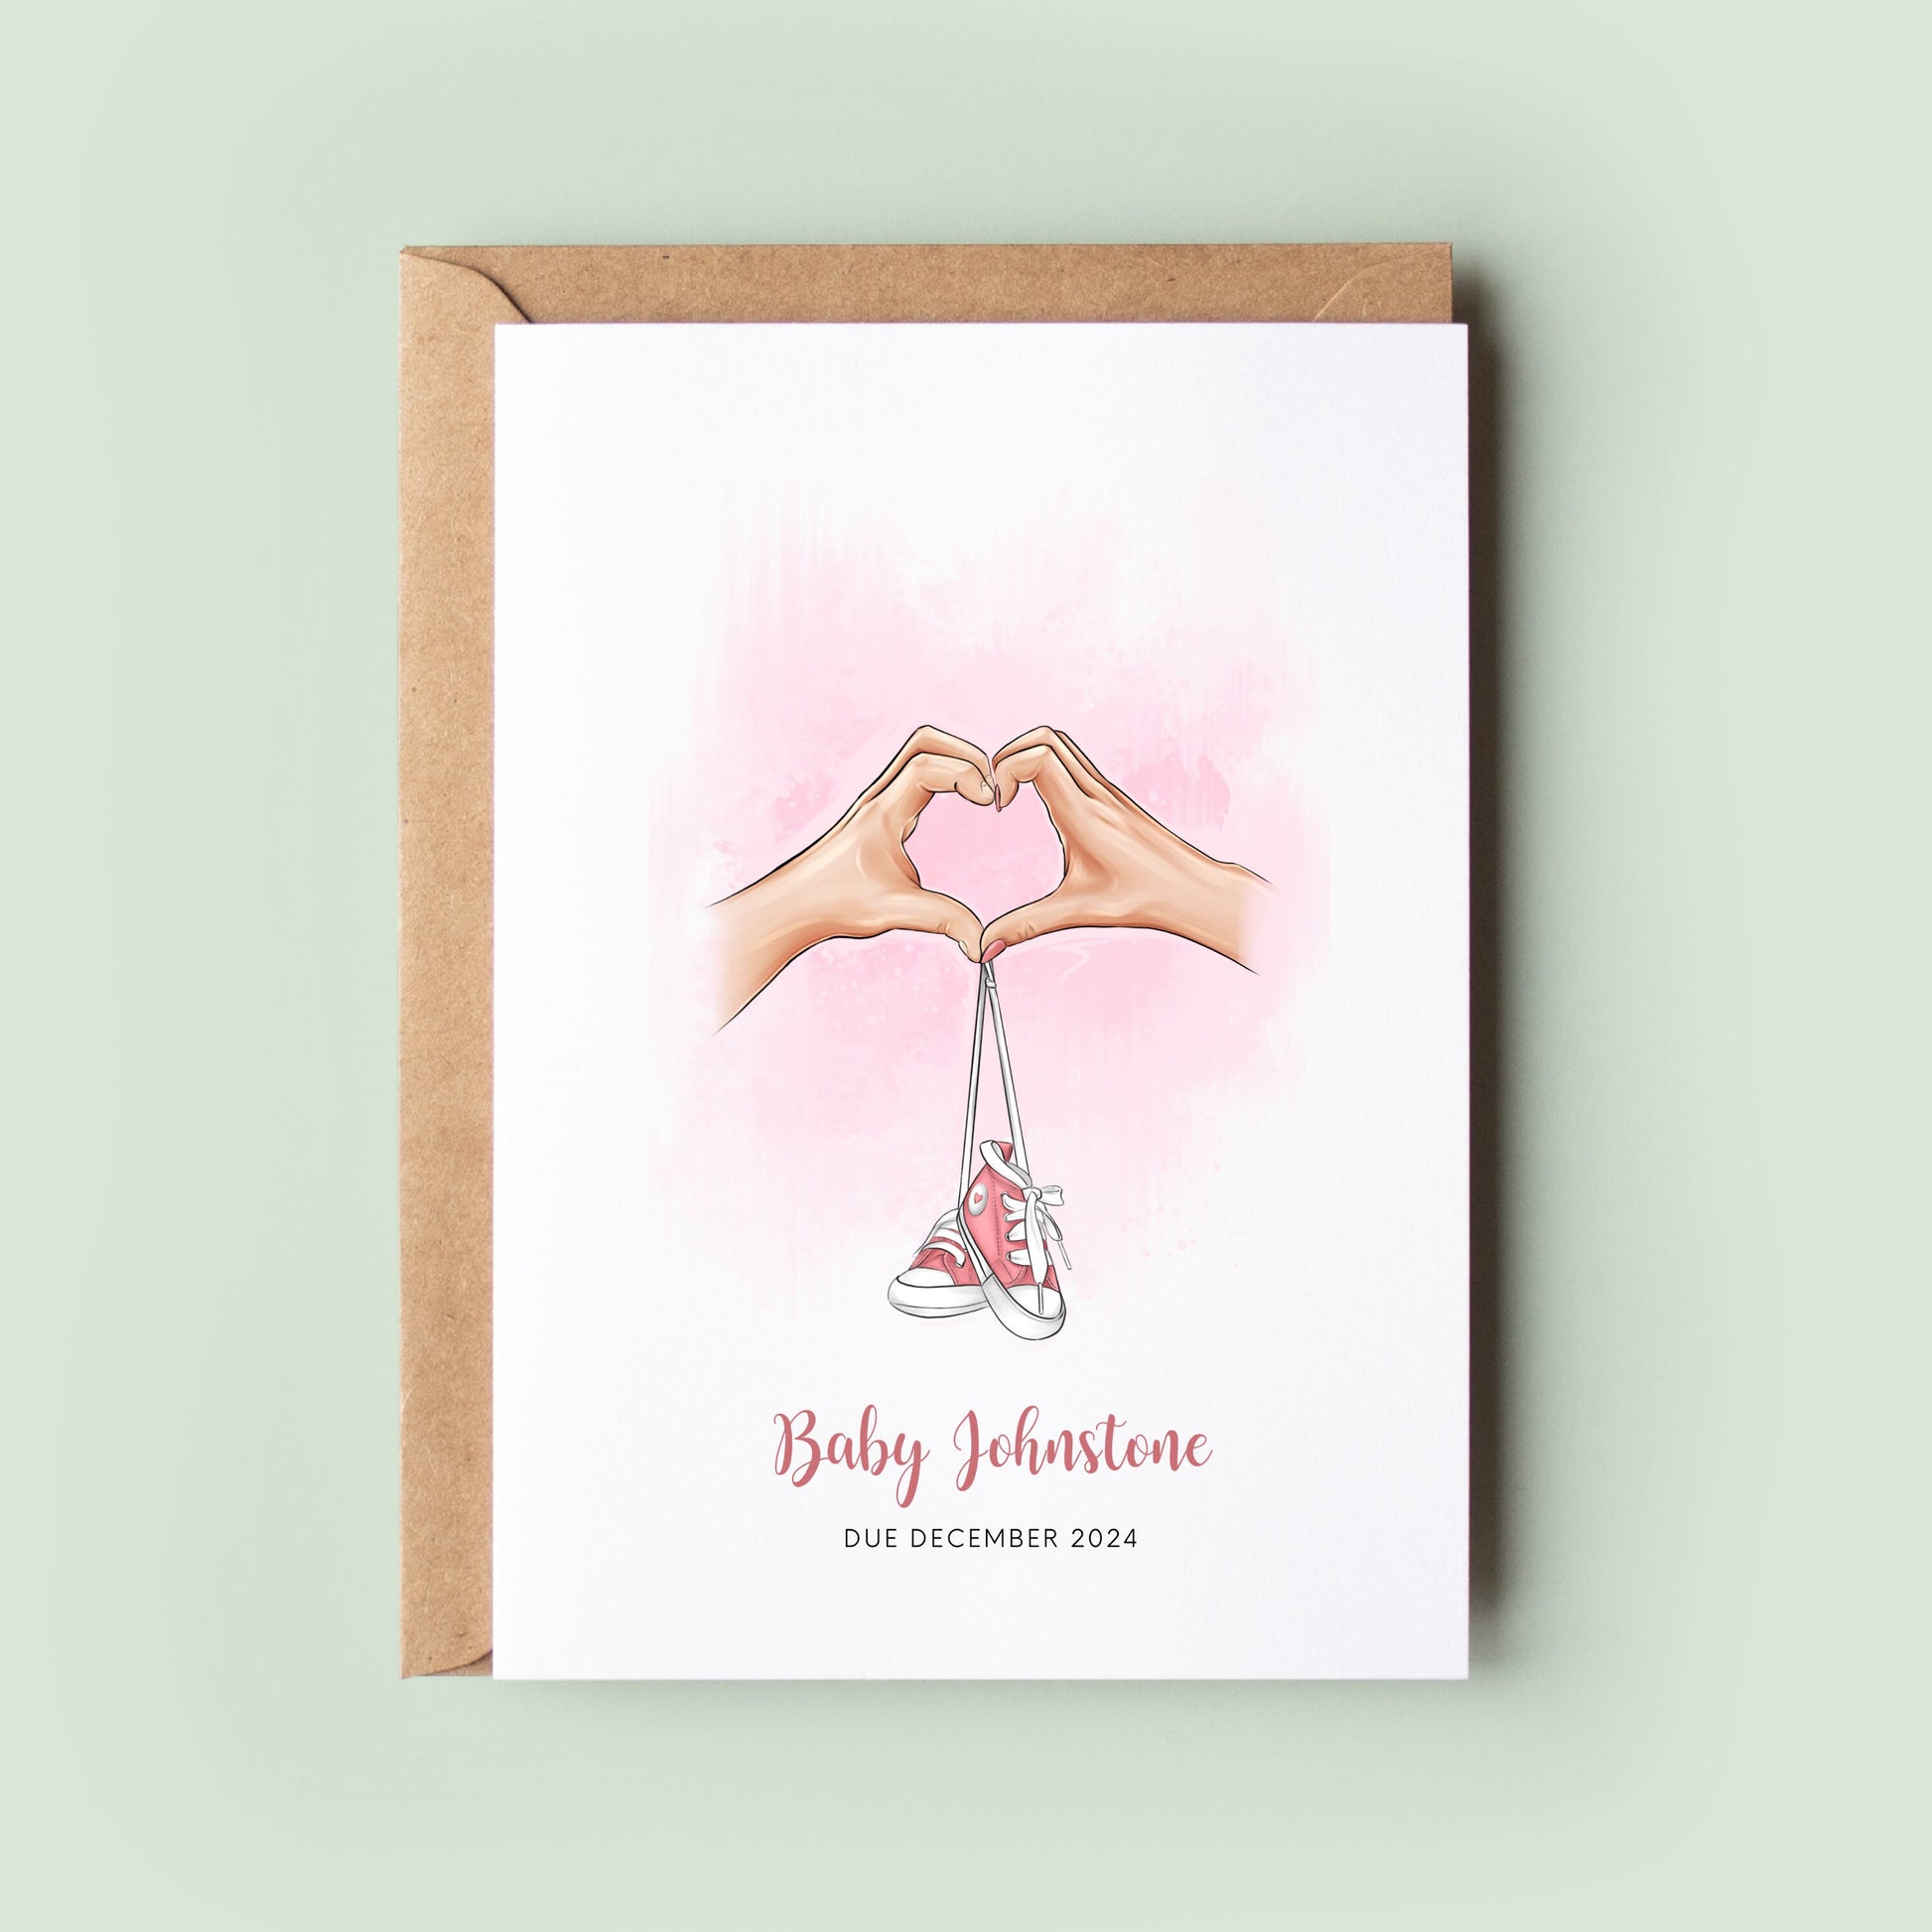 Pregnancy Announcement Card, Baby Announcement Card, Pregnancy Reveal Card, We're Having A Baby Card, New Baby, Personalised Baby